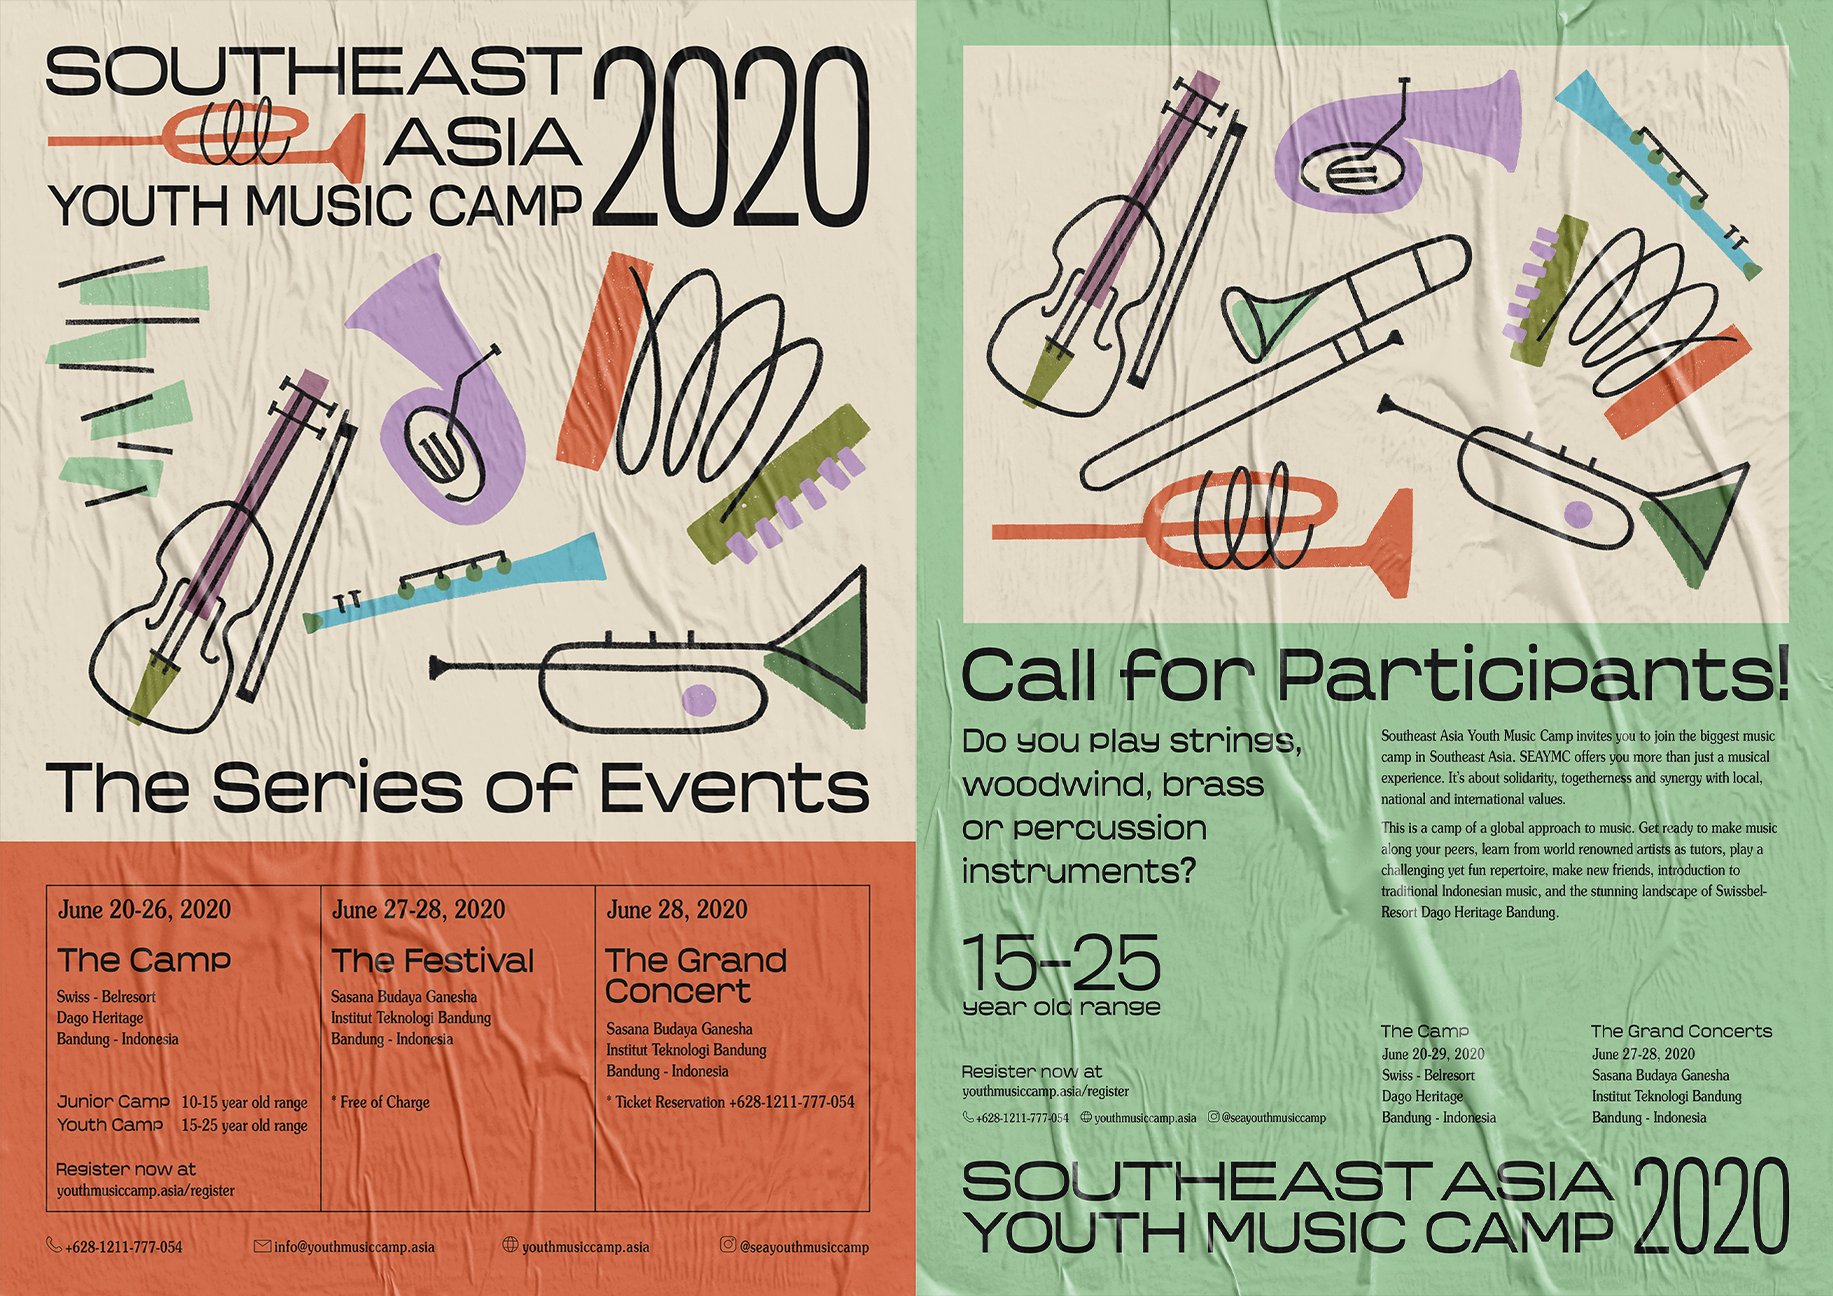 Southeast Asia Youth Music Camp by The 1984 Jakarta